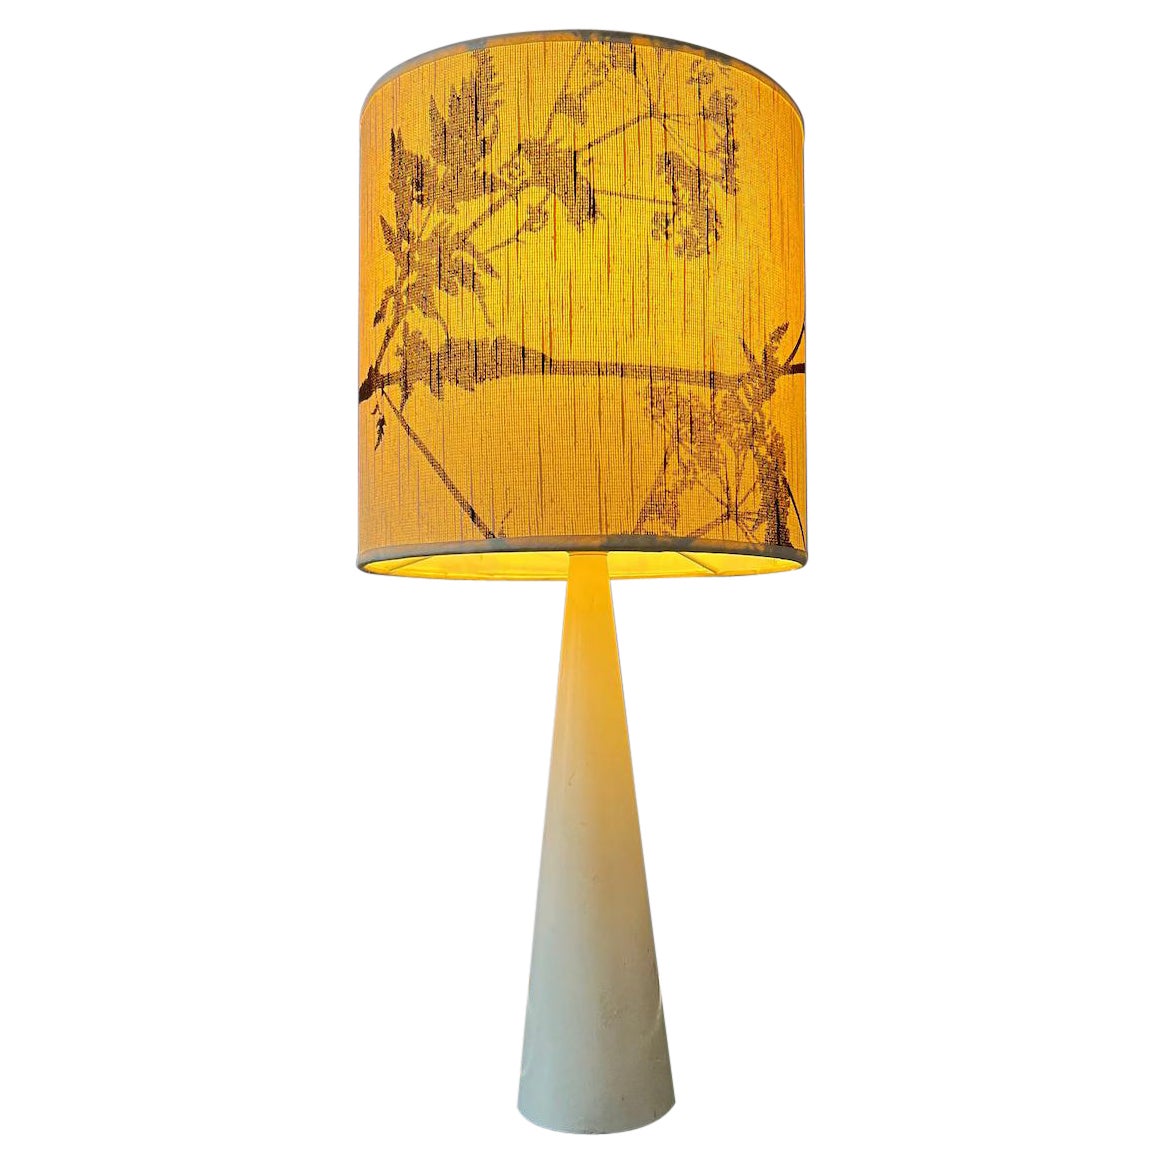 Elegant Mid Century Desk Lamp With Beautifully Patterned Shade, 1970s For Sale